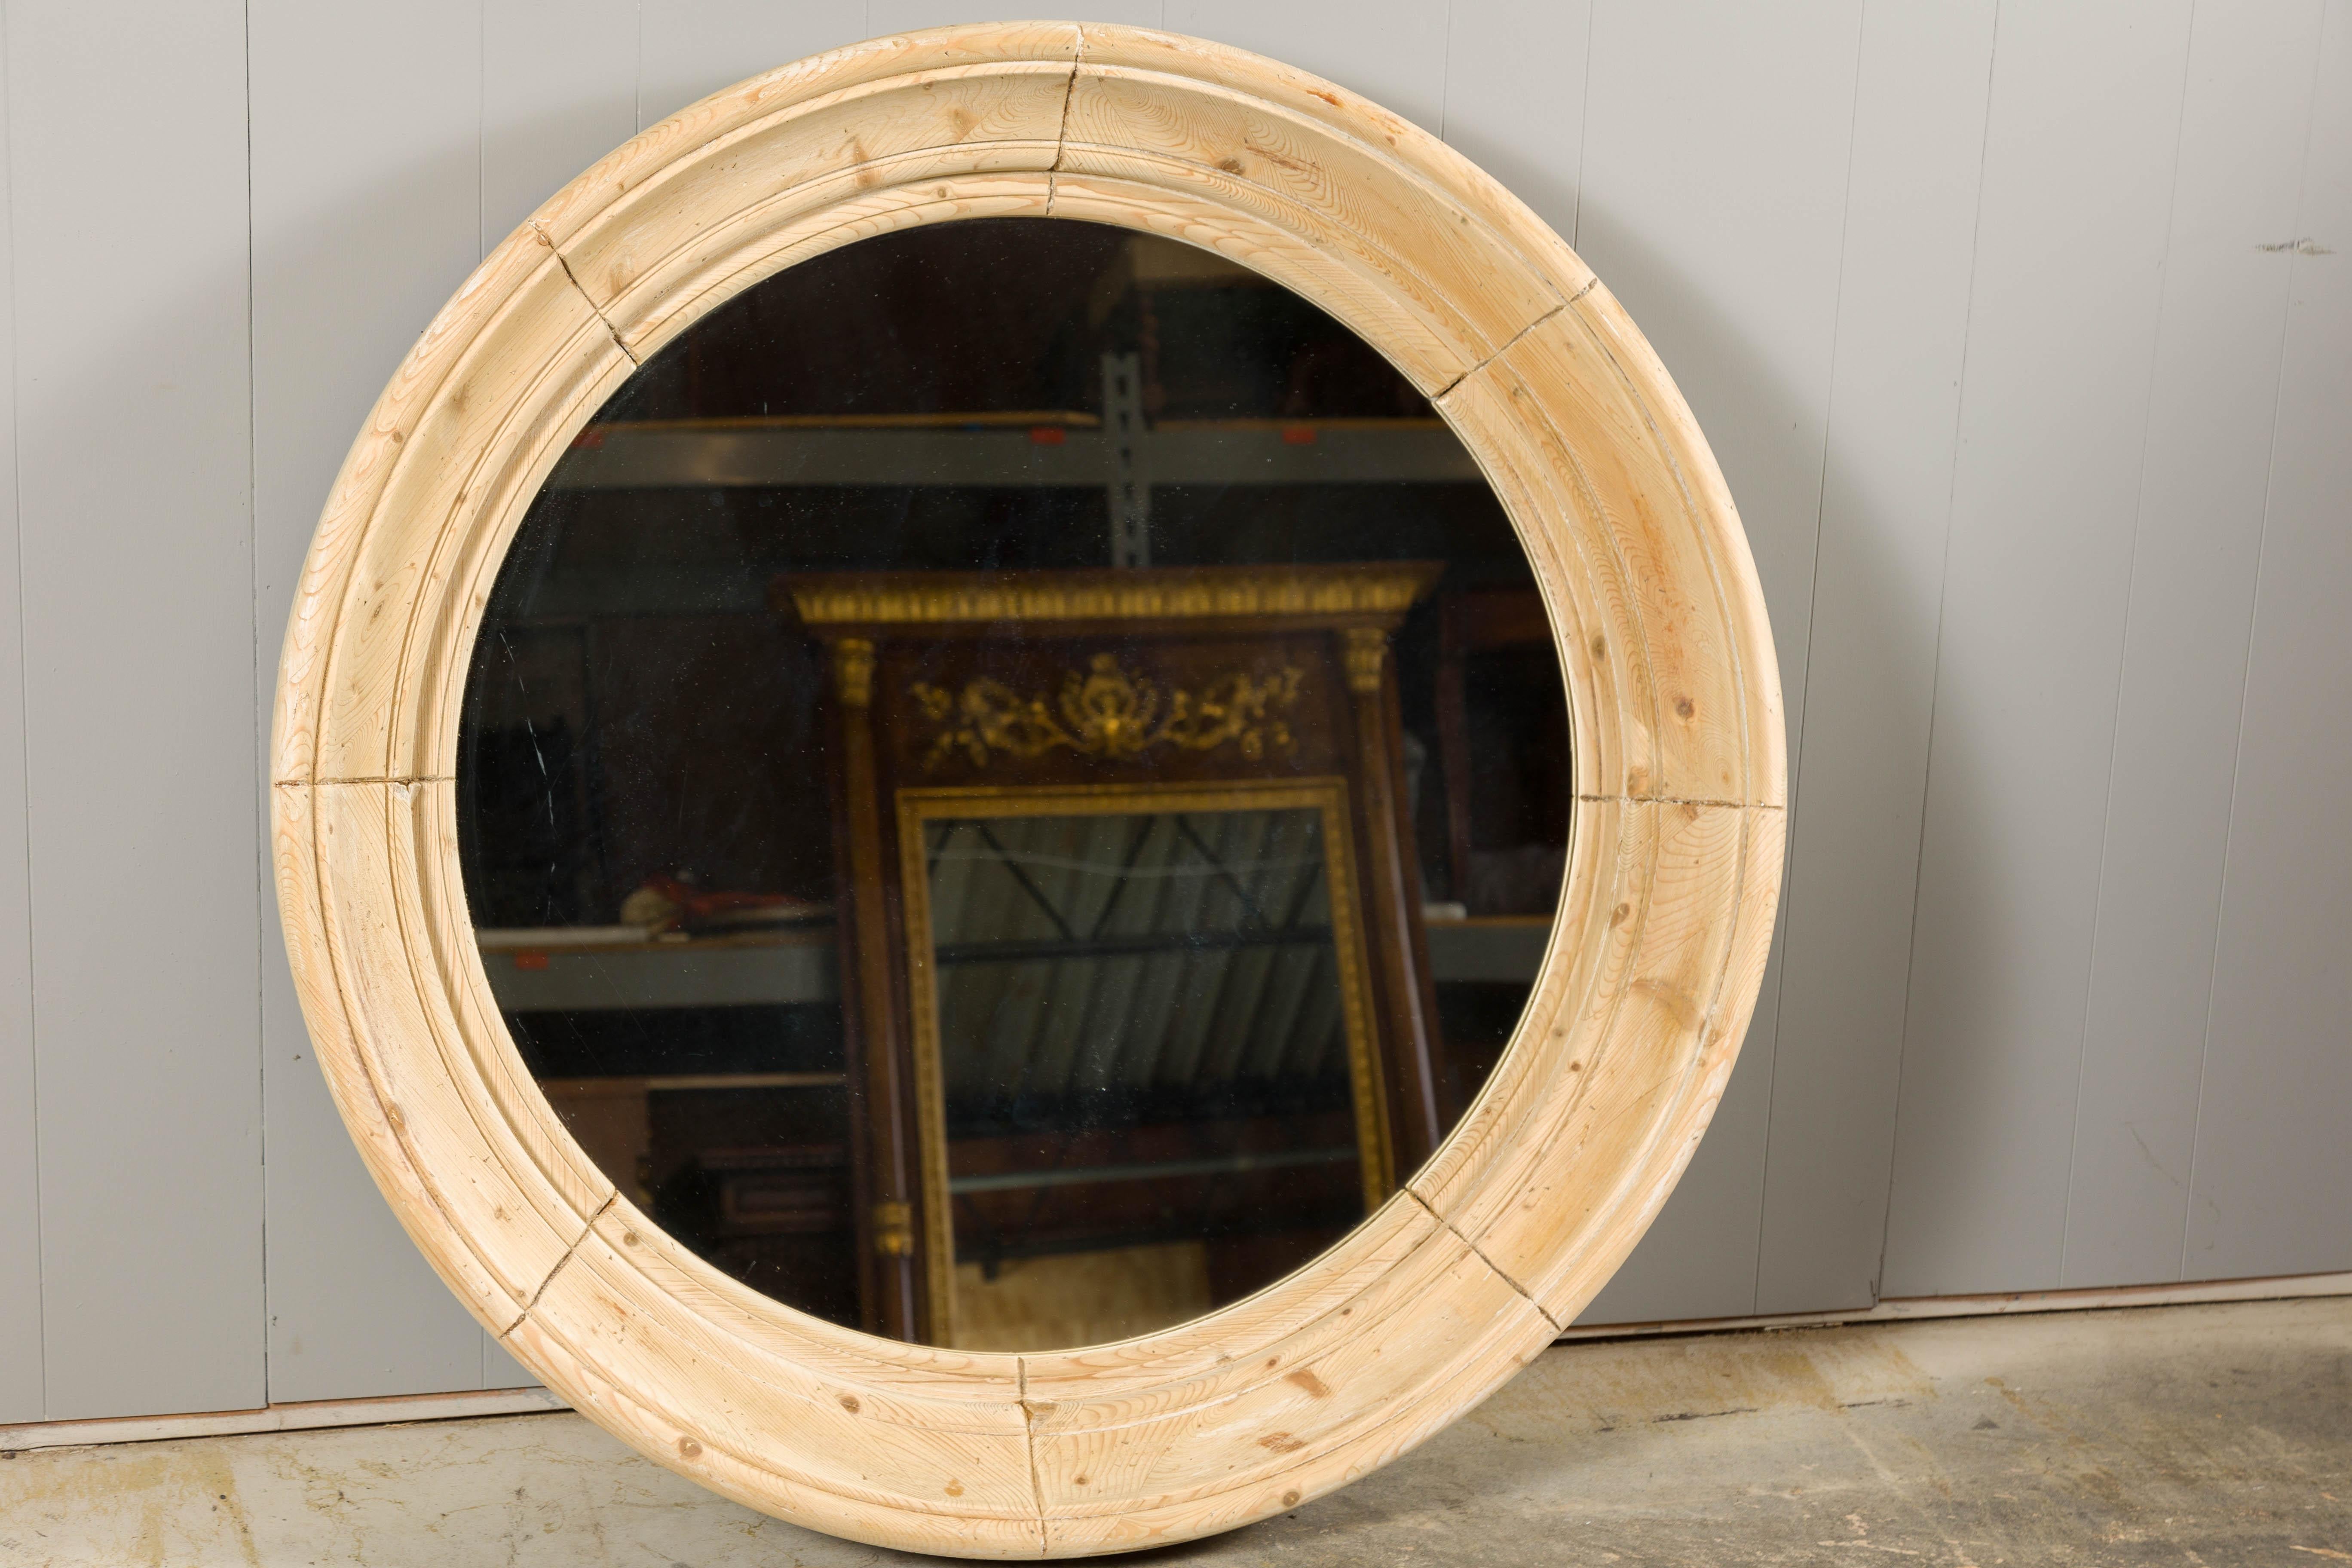 An English vintage Midcentury natural pine round bullseye mirror with in-curving frame and molded accents. Enhance your space with the rustic charm of this English vintage Midcentury bullseye mirror. Crafted from natural pine, this round mirror